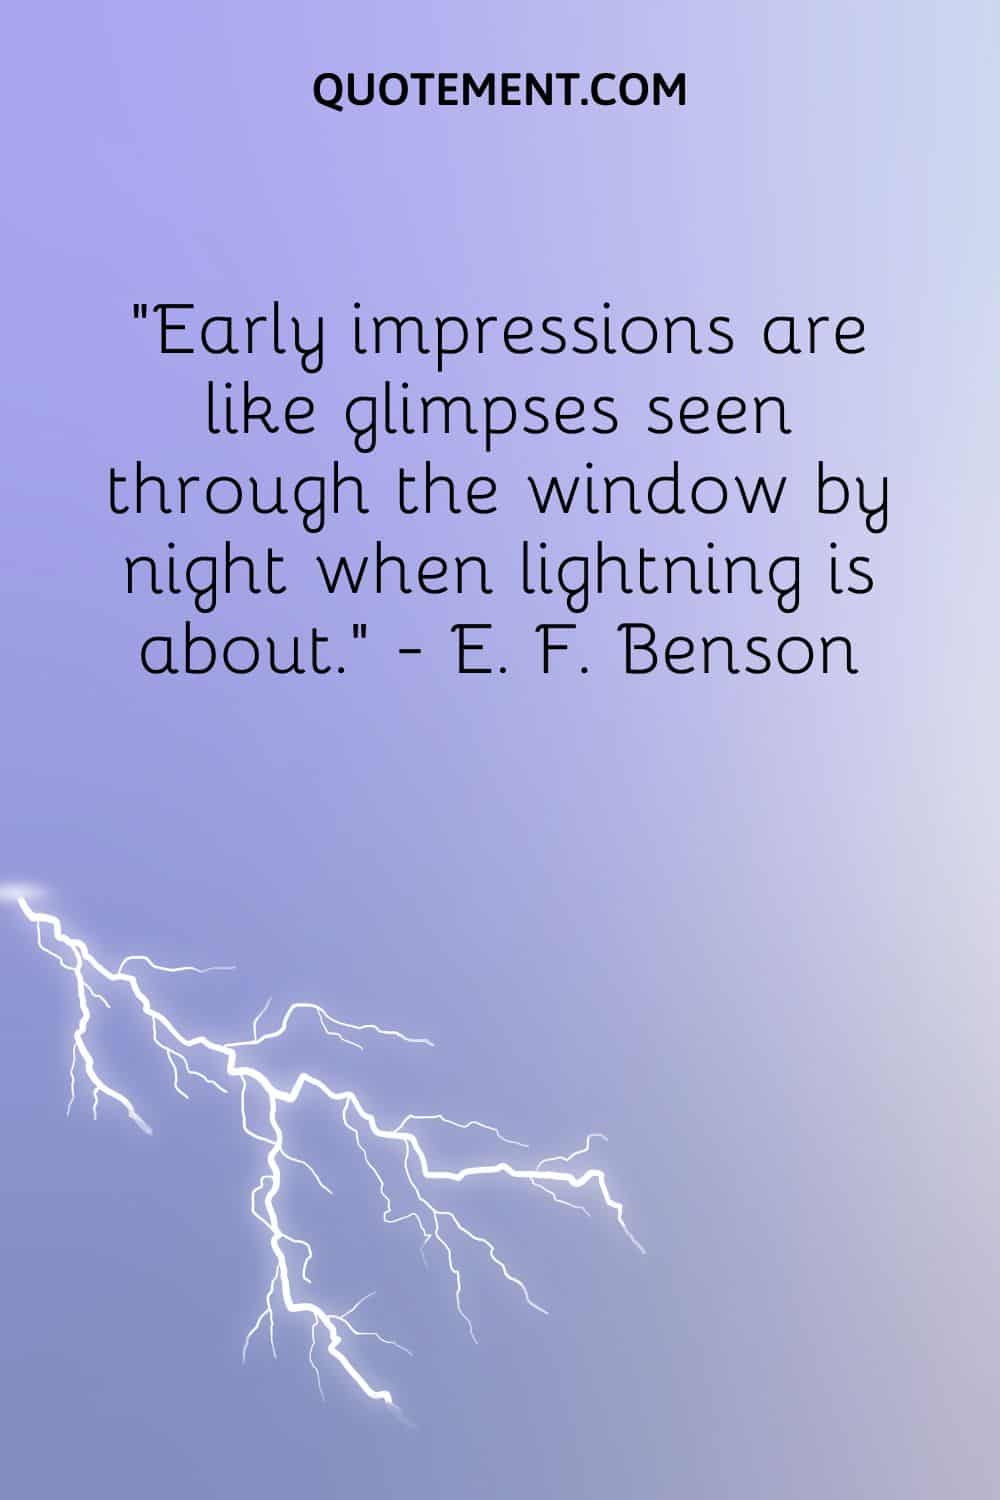 Early impressions are like glimpses seen through the window by night when lightning is about